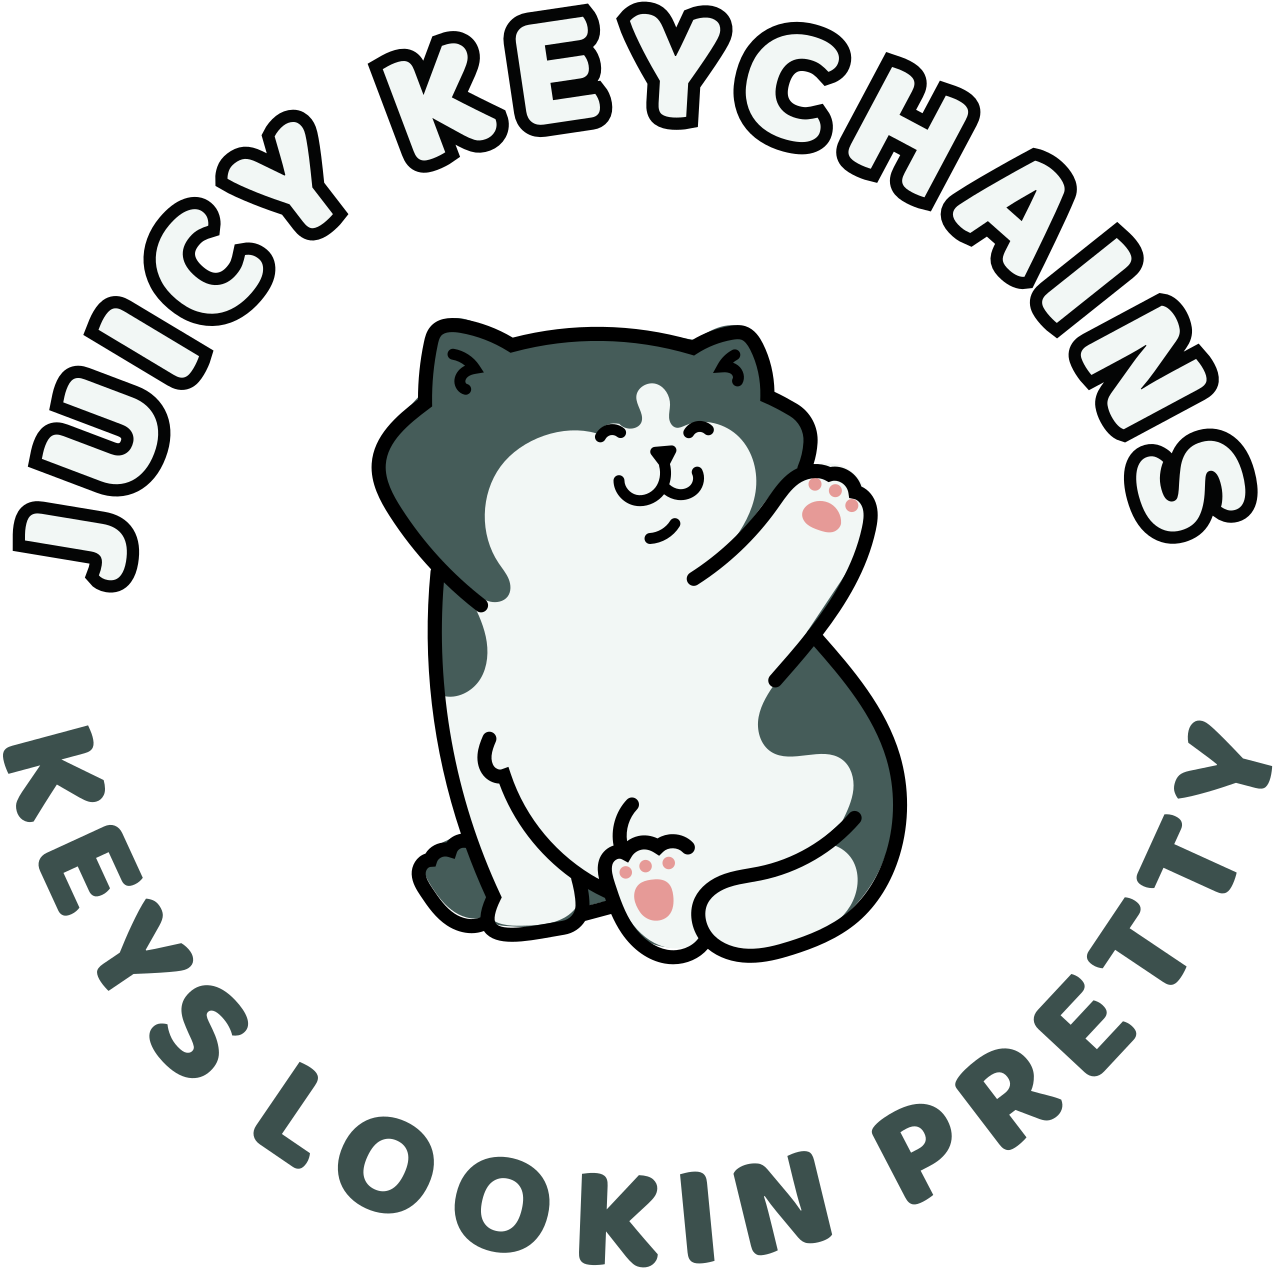 JUICY KEYCHAINS 's web page